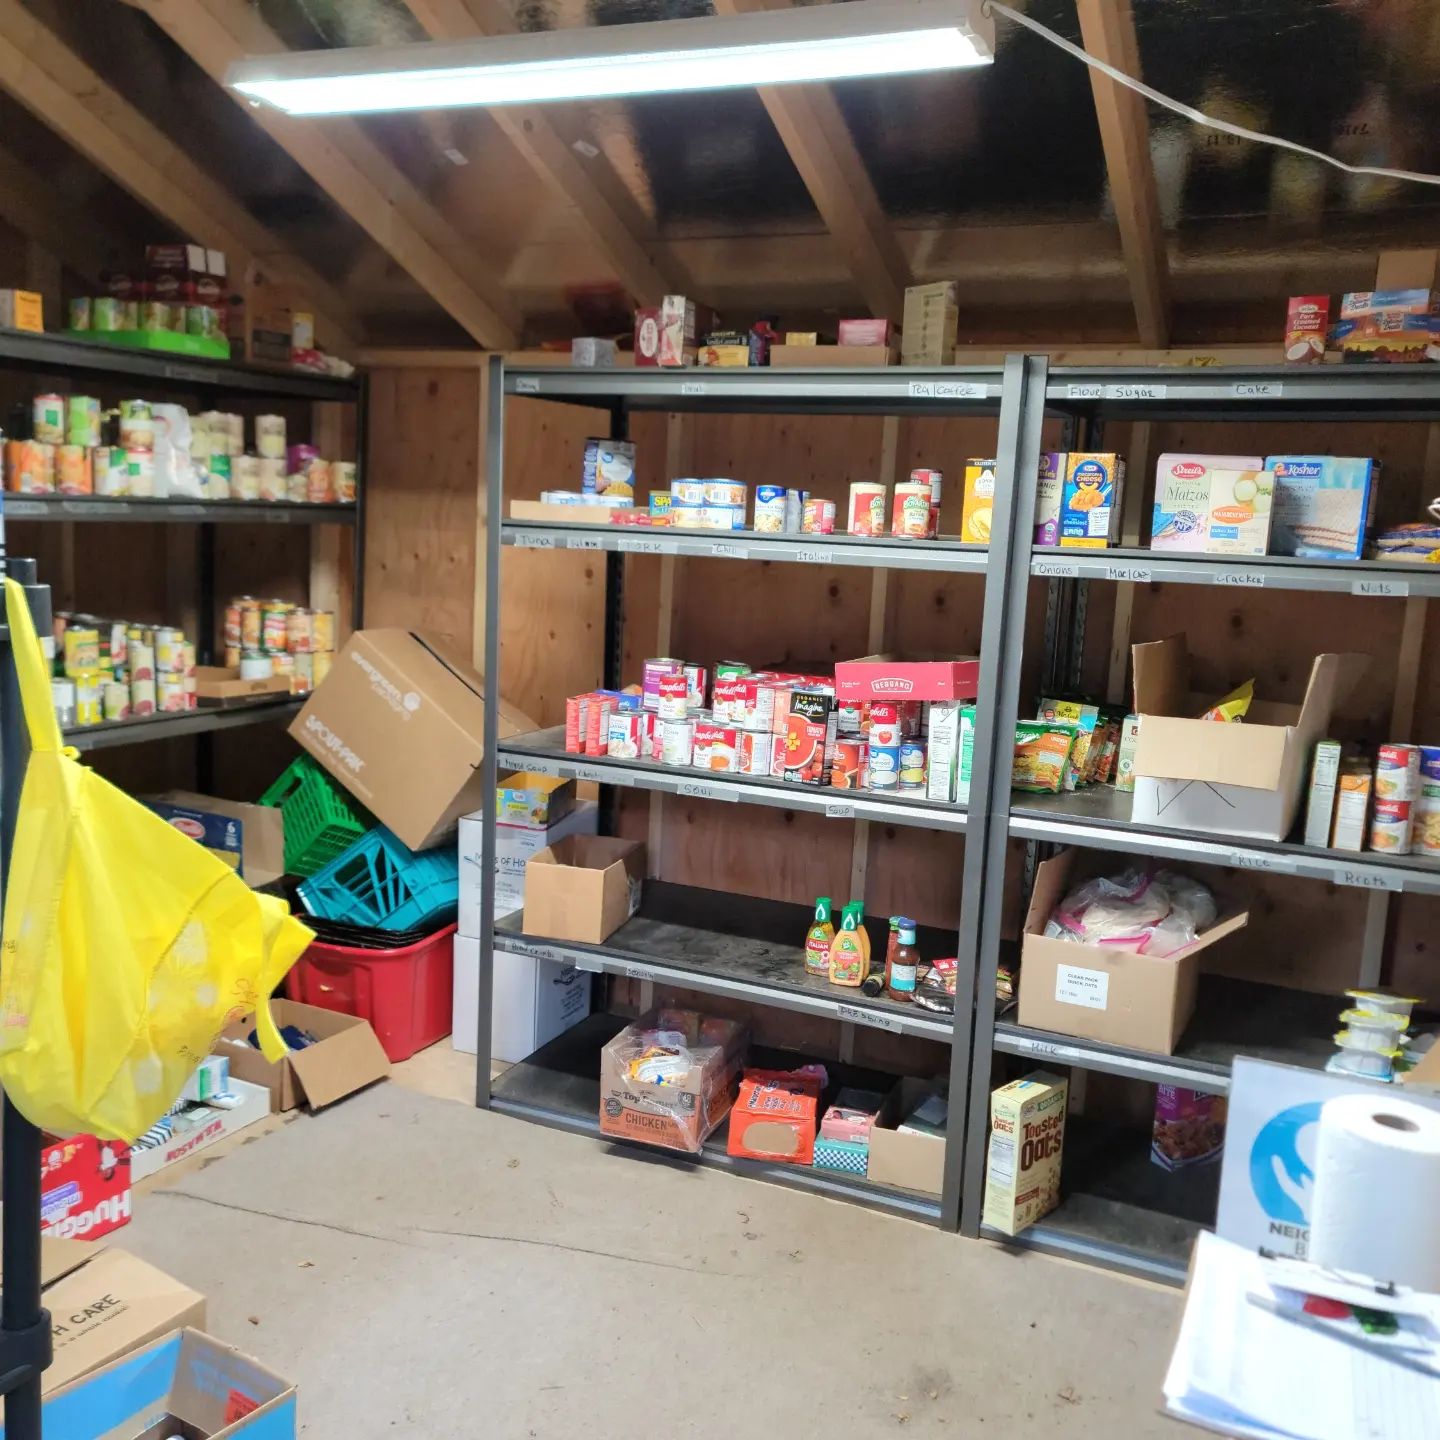 Neighbors Being Human at St Andrew's Episcopal Church Food Pantry